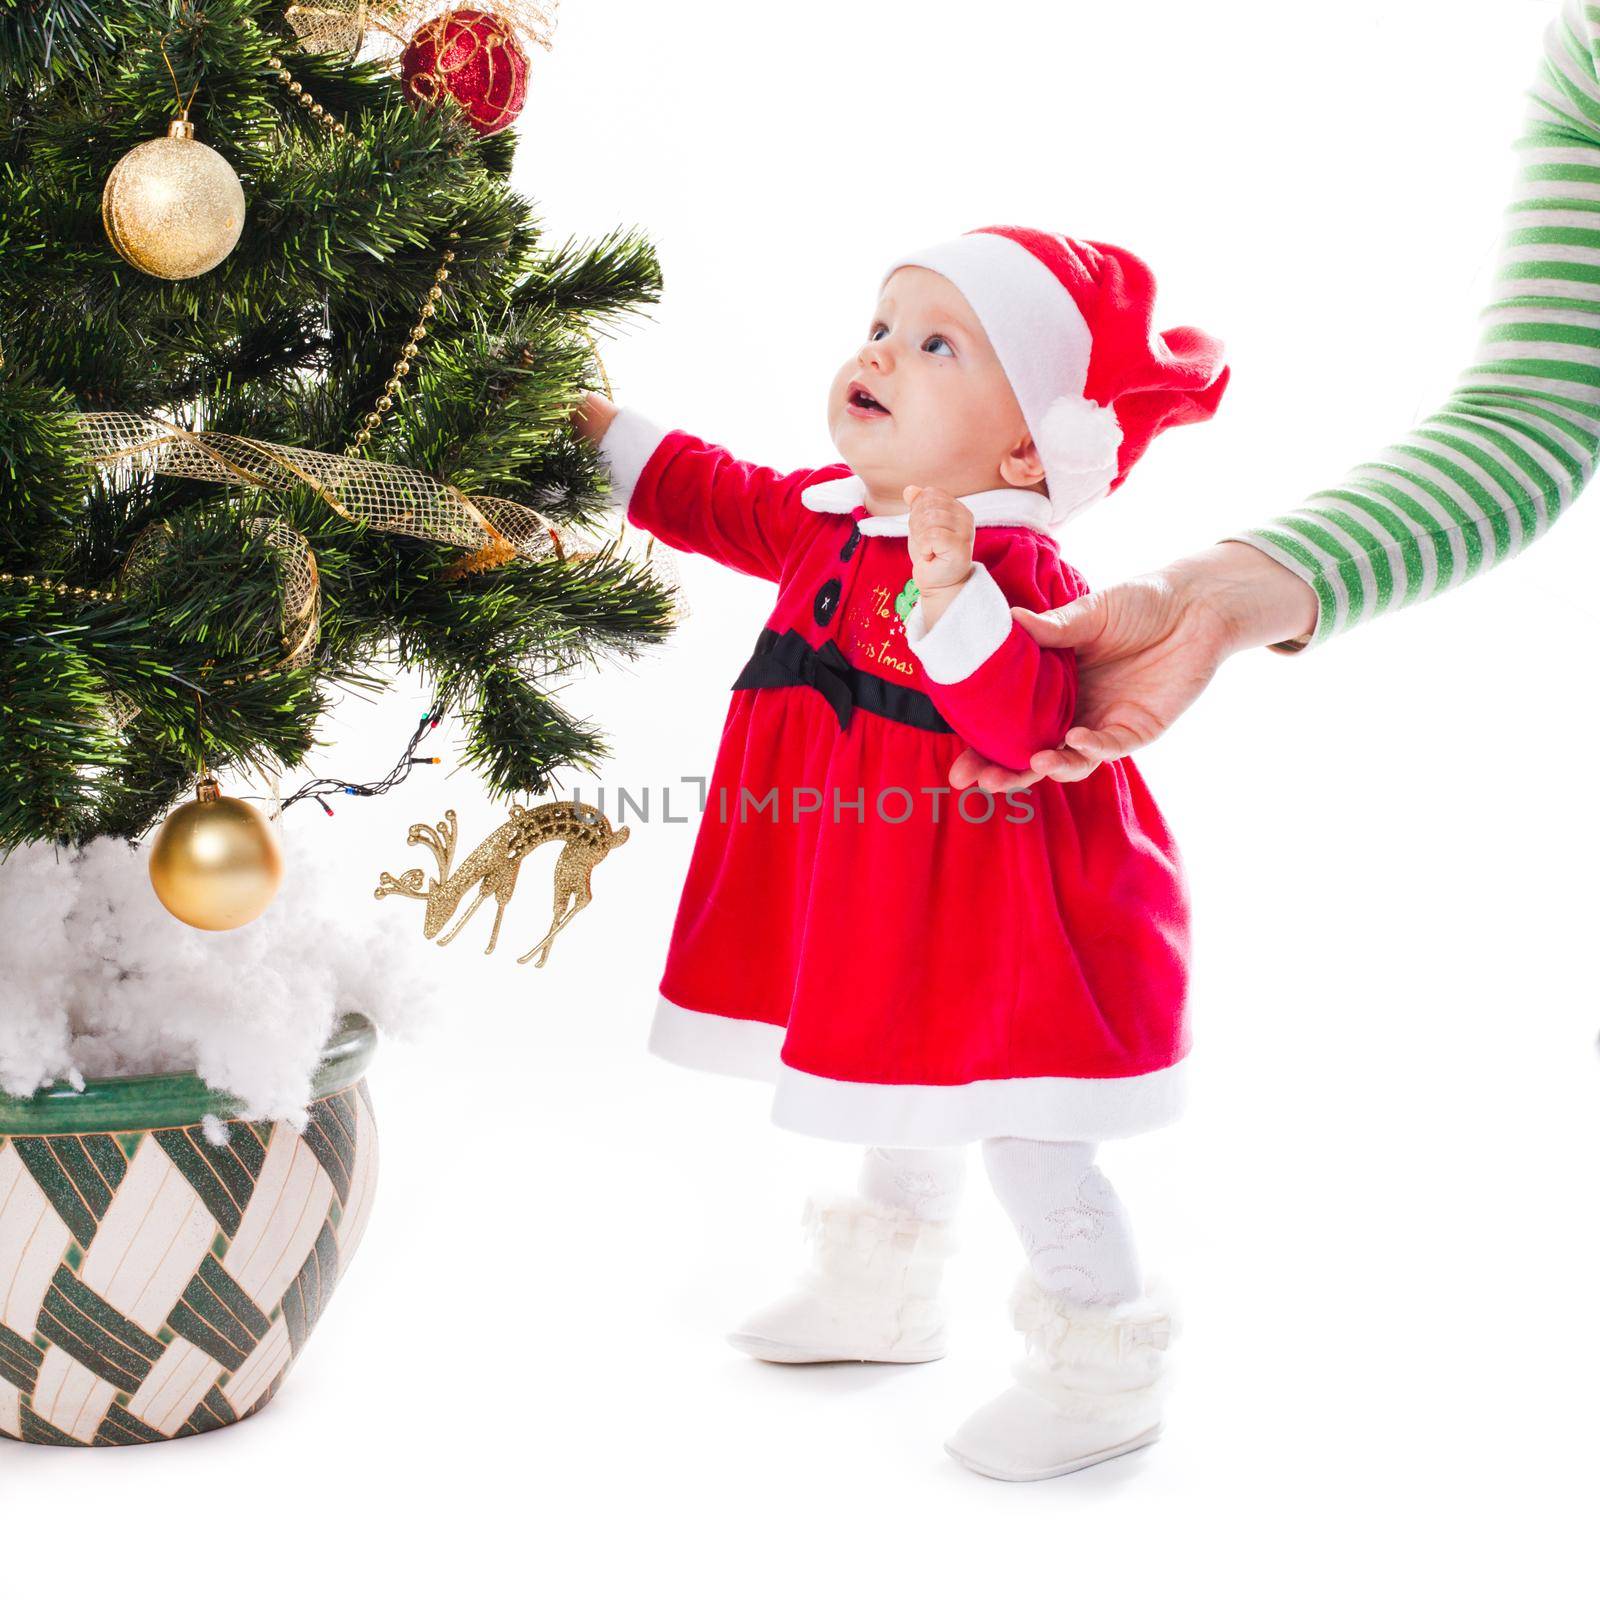 Santa baby girl in dress near Christmas tree with mother's hand - my first holiday